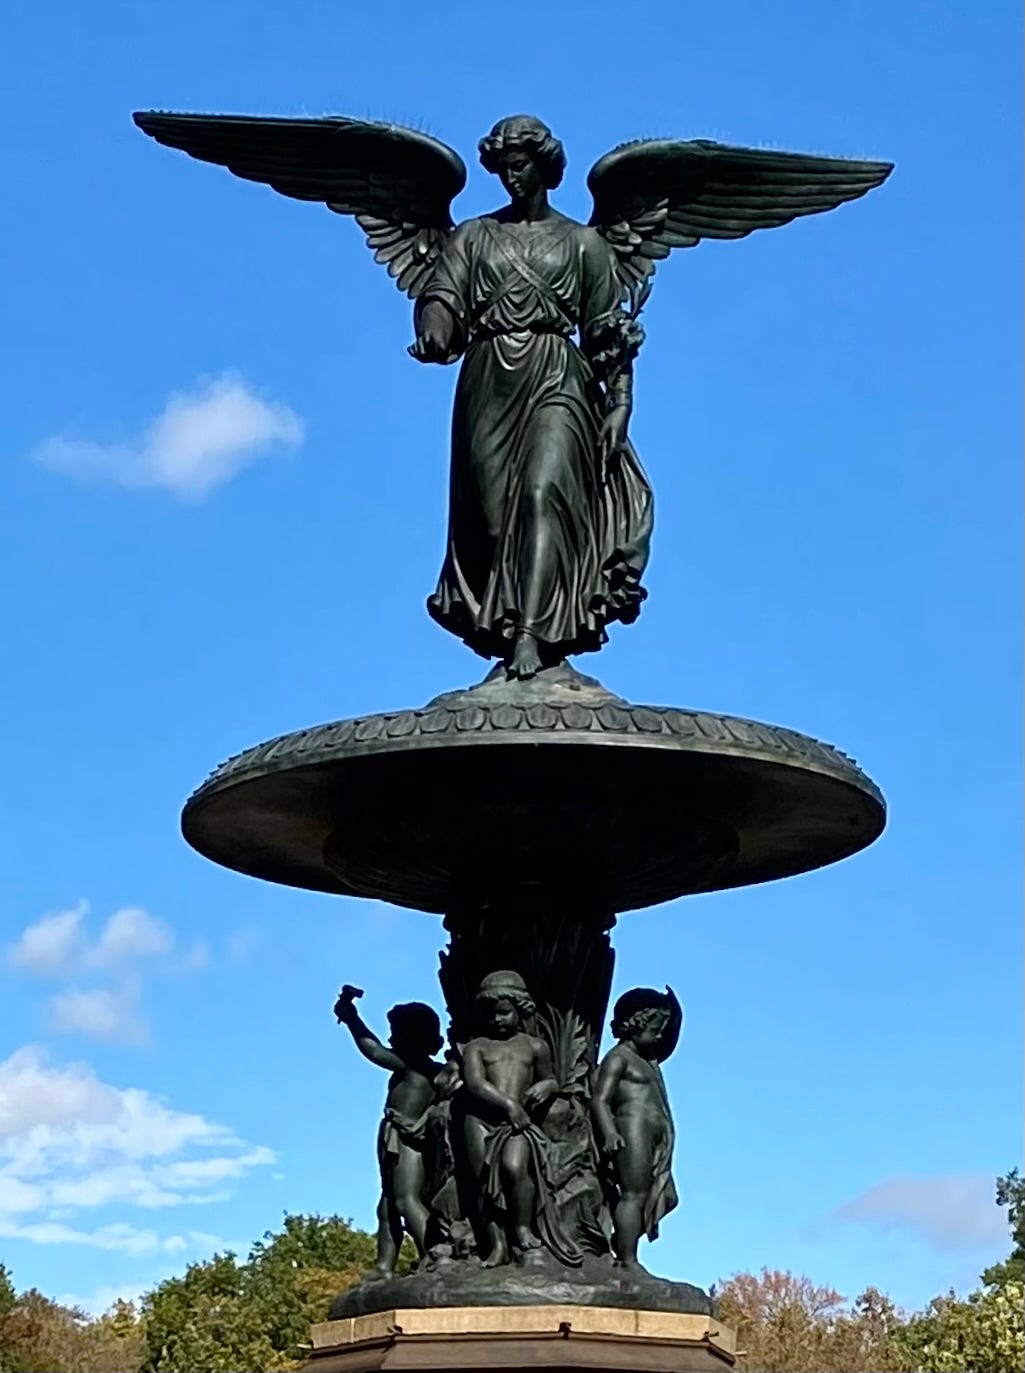 The angel of the Bethesda fountain in the sunshine against a blue sky.